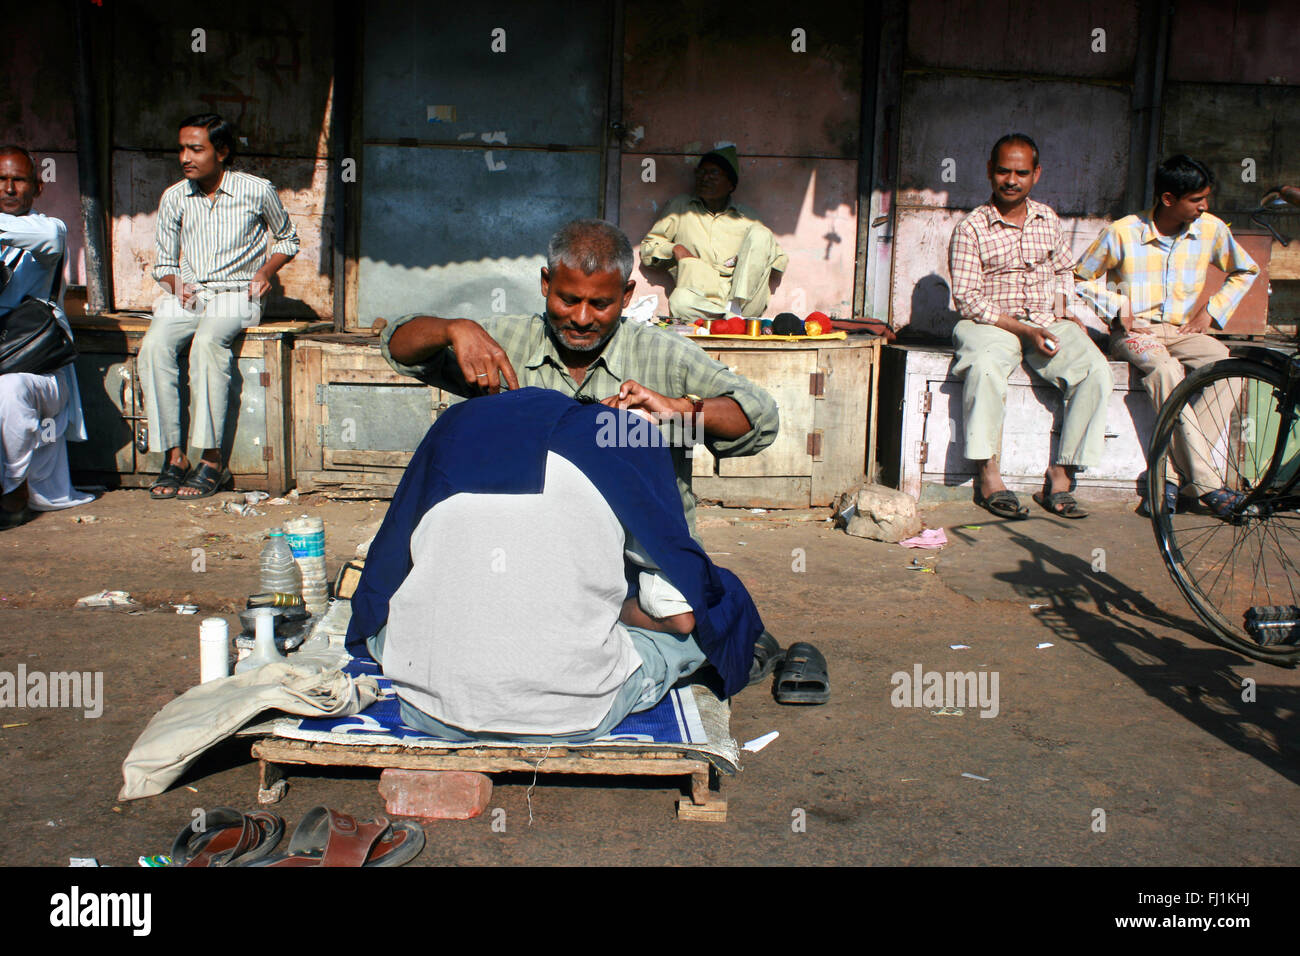 Street hairdresser and barber in Jaipur, India Stock Photo